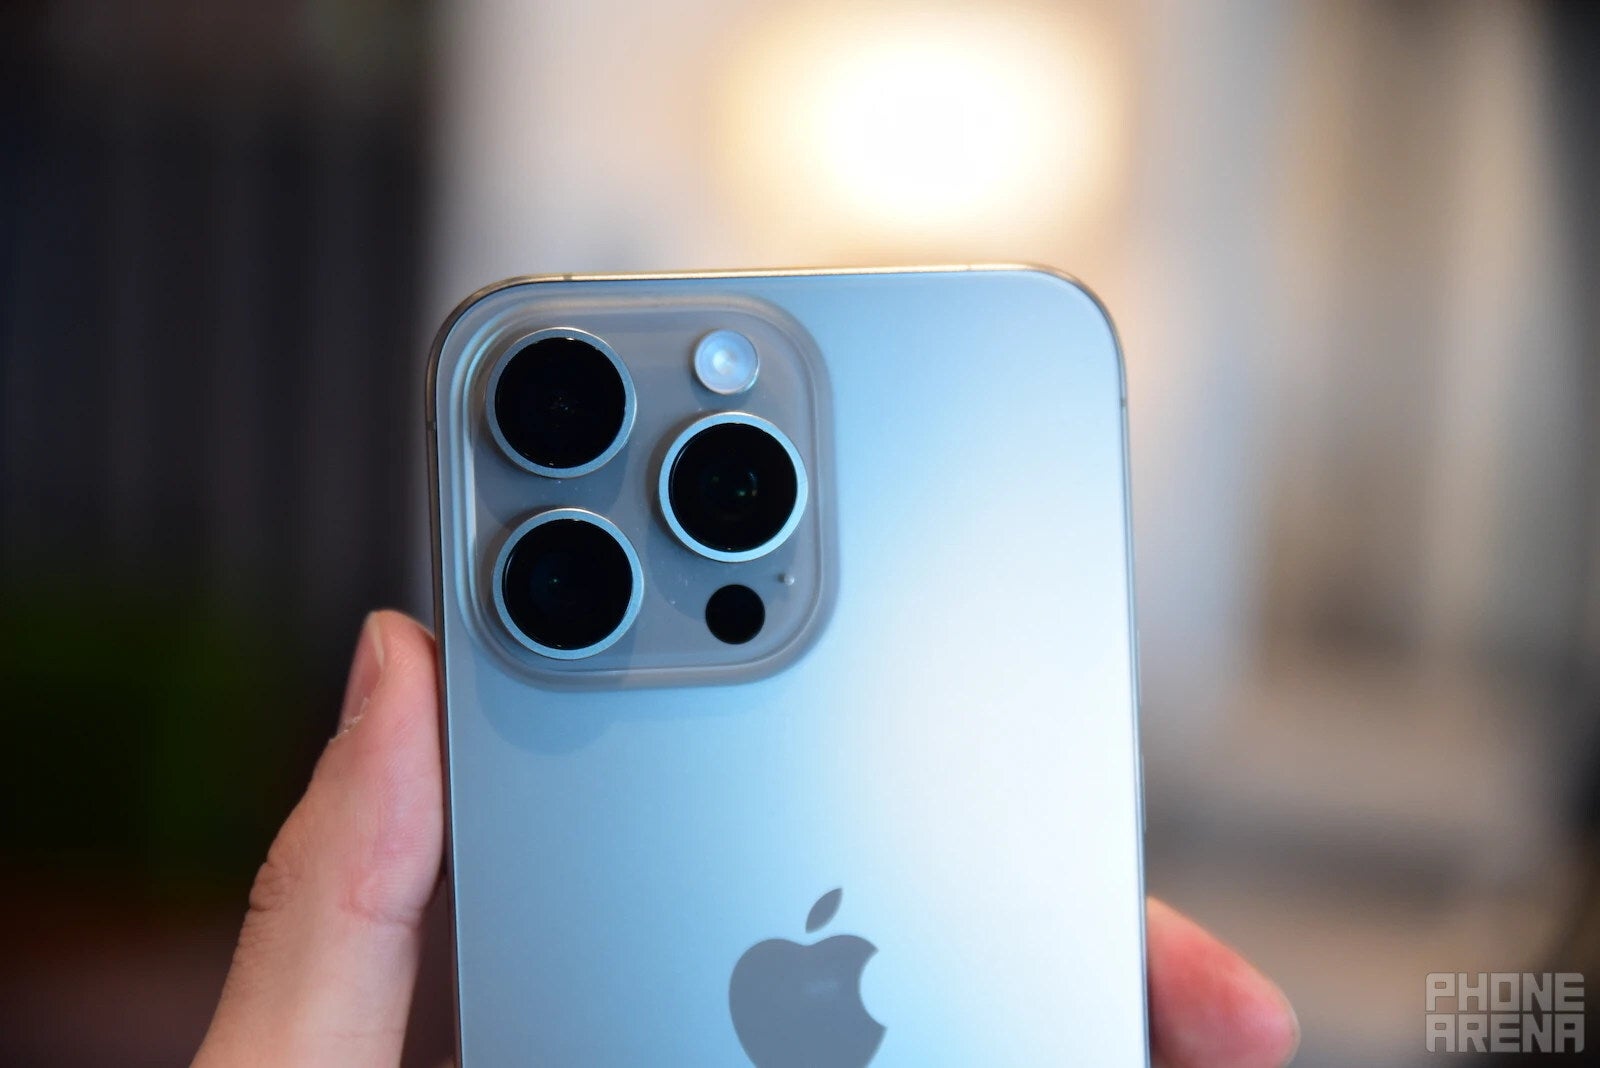 Ah, the three cameras in trademark triangle arrangement – talk about crafting an immediately recognizable and unmistakable design element | image credit - PhoneArena.com - You don’t need iPhone 15 Pro but you want it: The psychological tricks Apple plays to make you upgrade